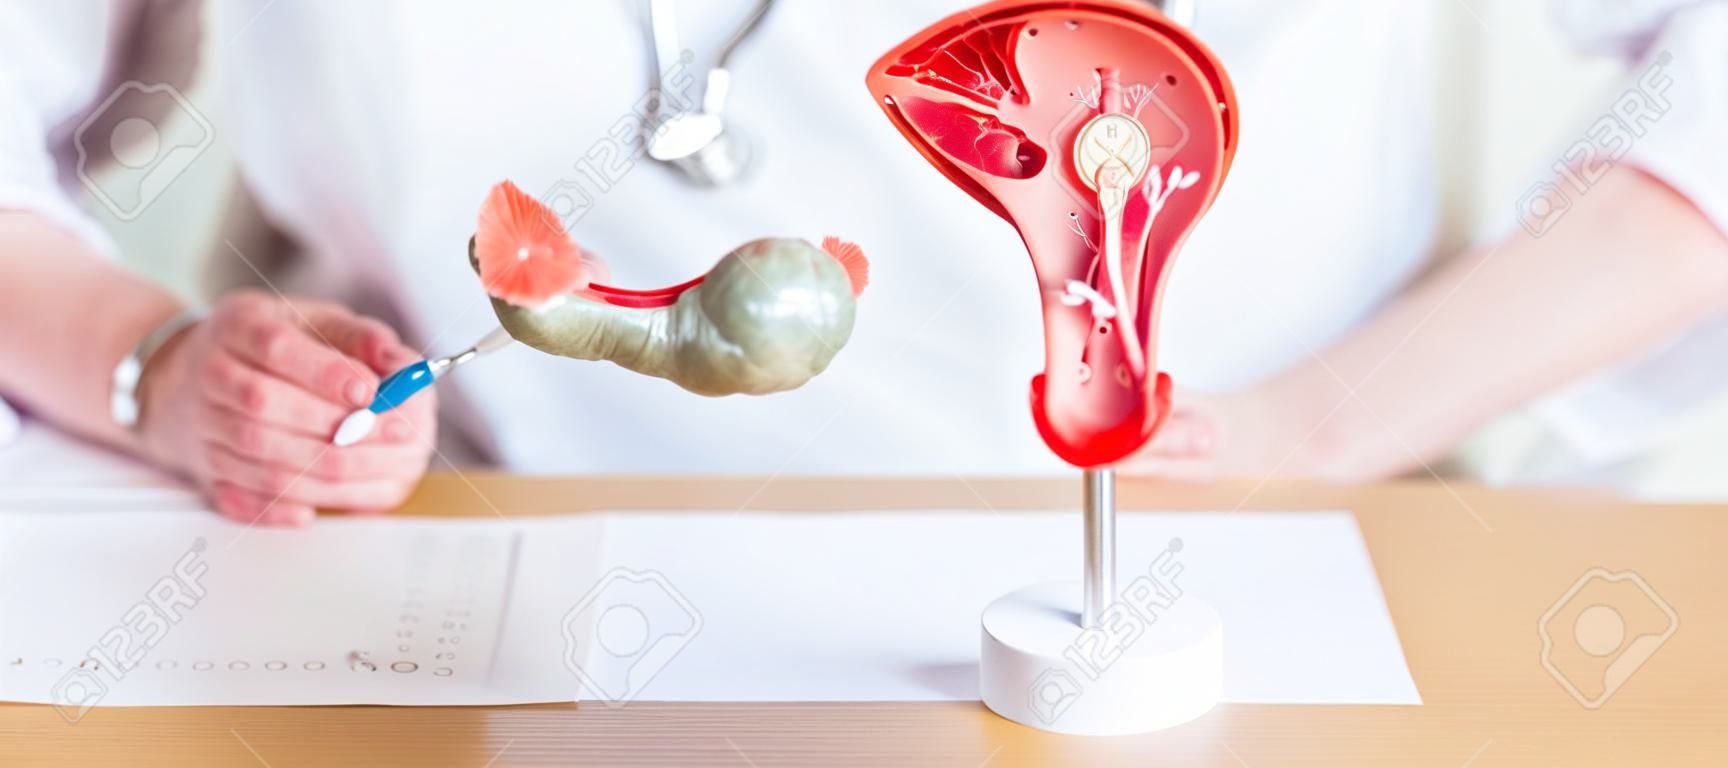 Doctor with Uterus and Ovaries anatomy model. Ovarian and Cervical cancer, Cervix disorder, Endometriosis, Hysterectomy, Uterine fibroids, Reproductive system, Pregnancy and health concept